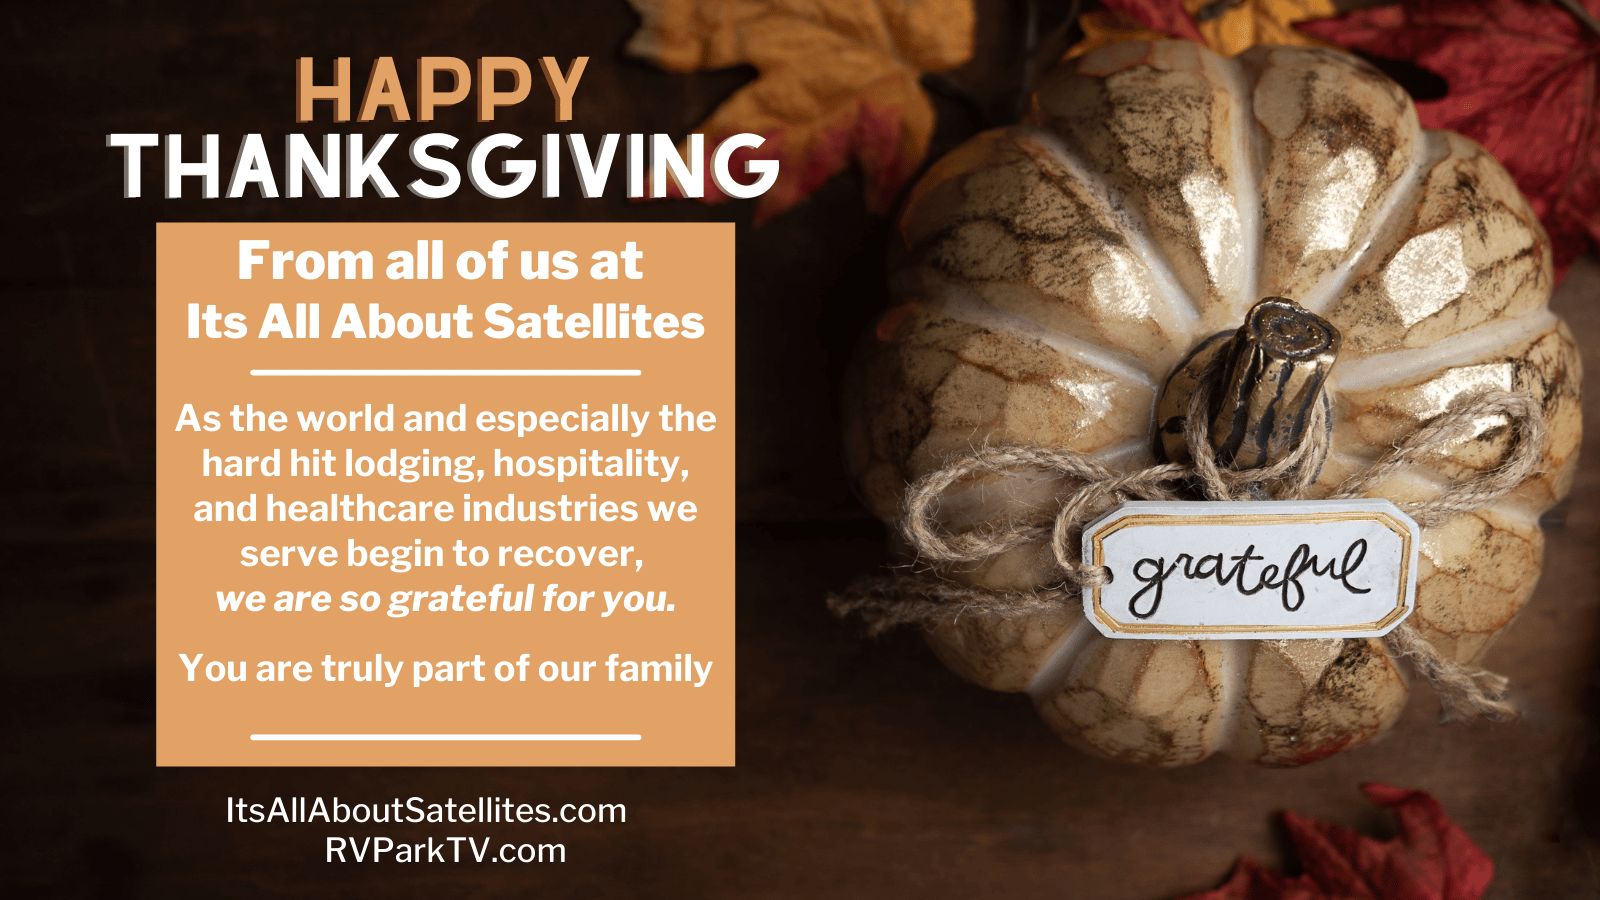 Happy Thanksgiving to You from the Its All Abouut Satellites and RVParkTV.com Family